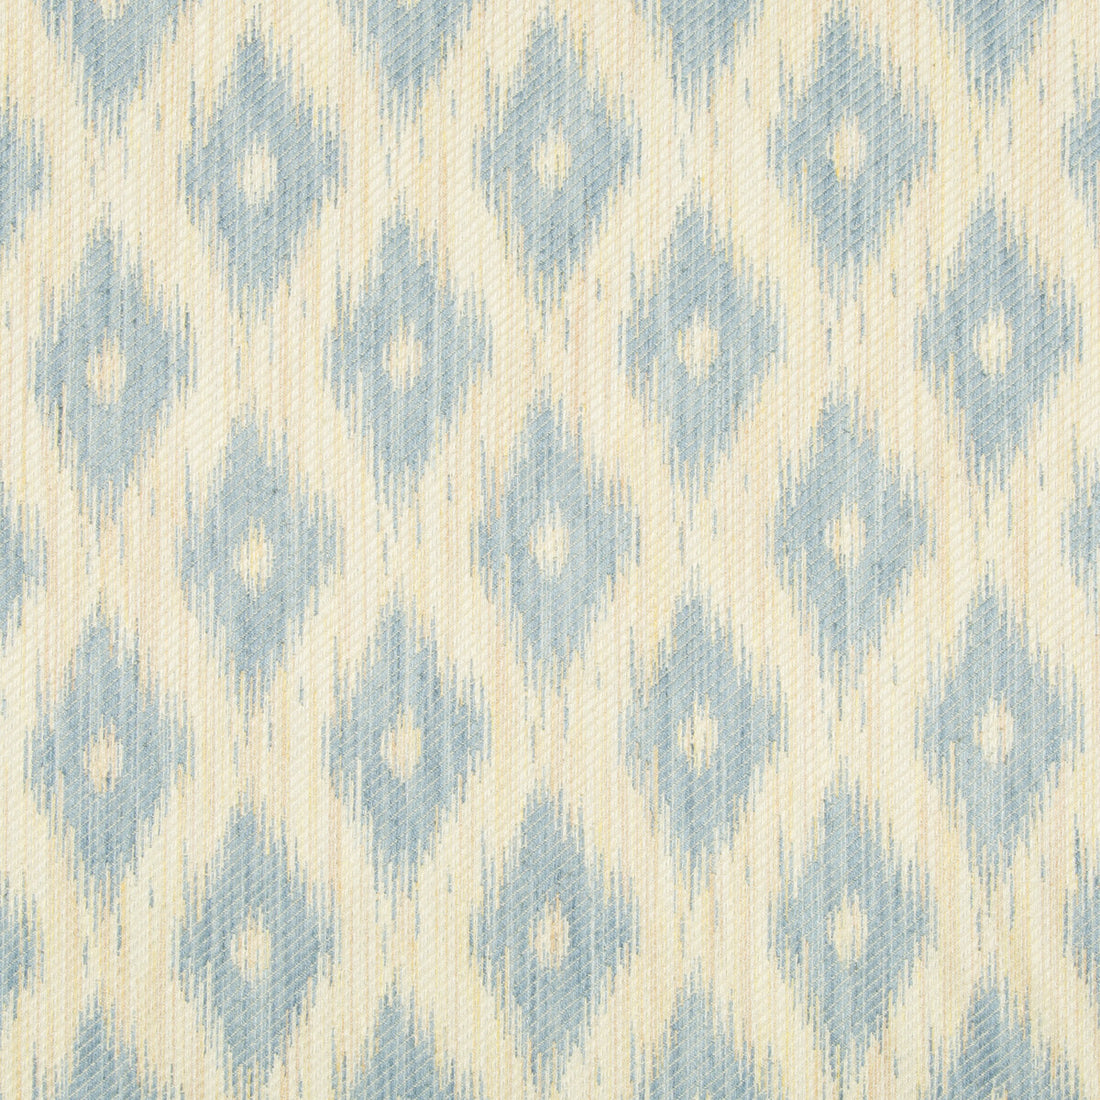 Viceroy Strie II fabric in sky color - pattern 8017139.15.0 - by Brunschwig &amp; Fils in the Baronet collection